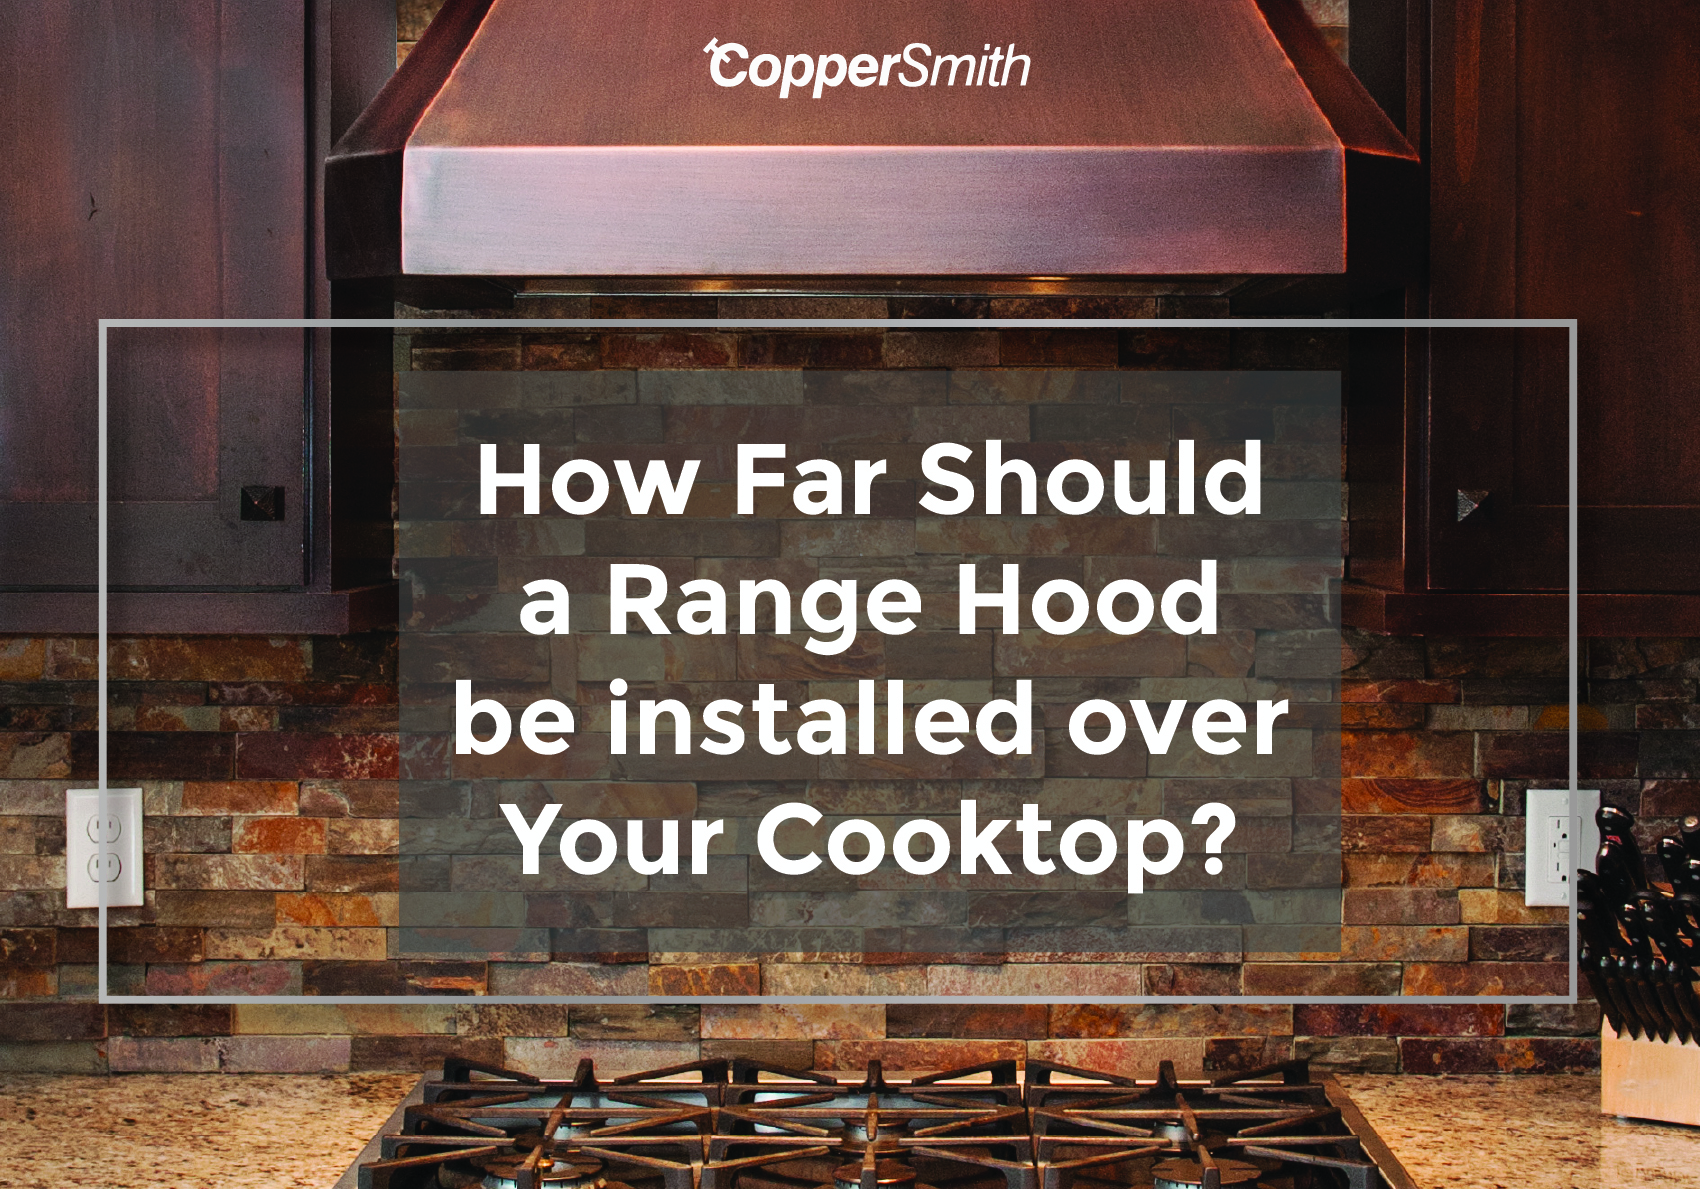 How far should a range hood be installed over a cooktop